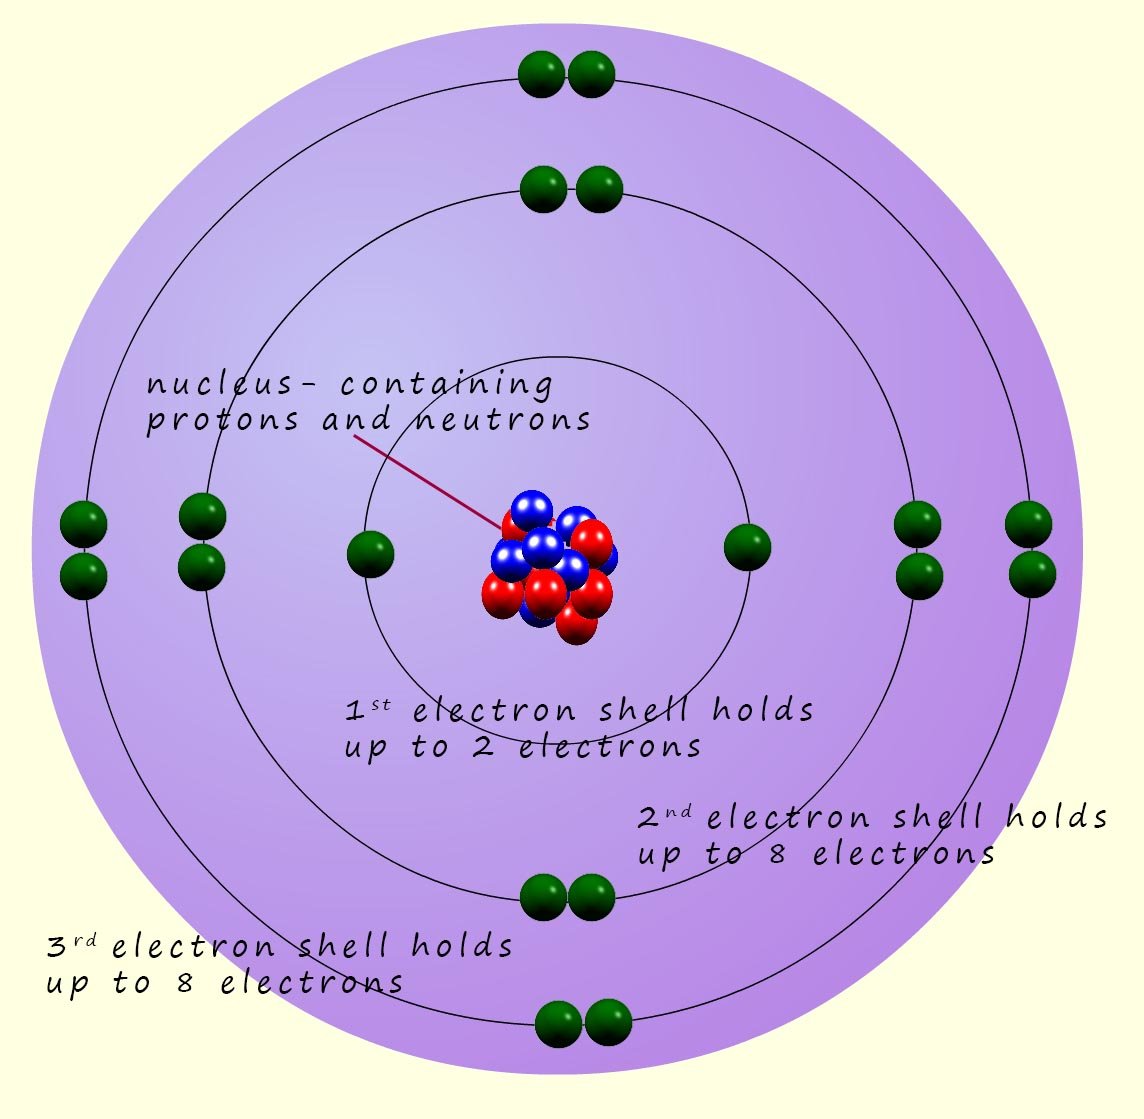 atomic structure diagram showing position of protons, neutrons inside the nucleus and the electrons in the electron shells.